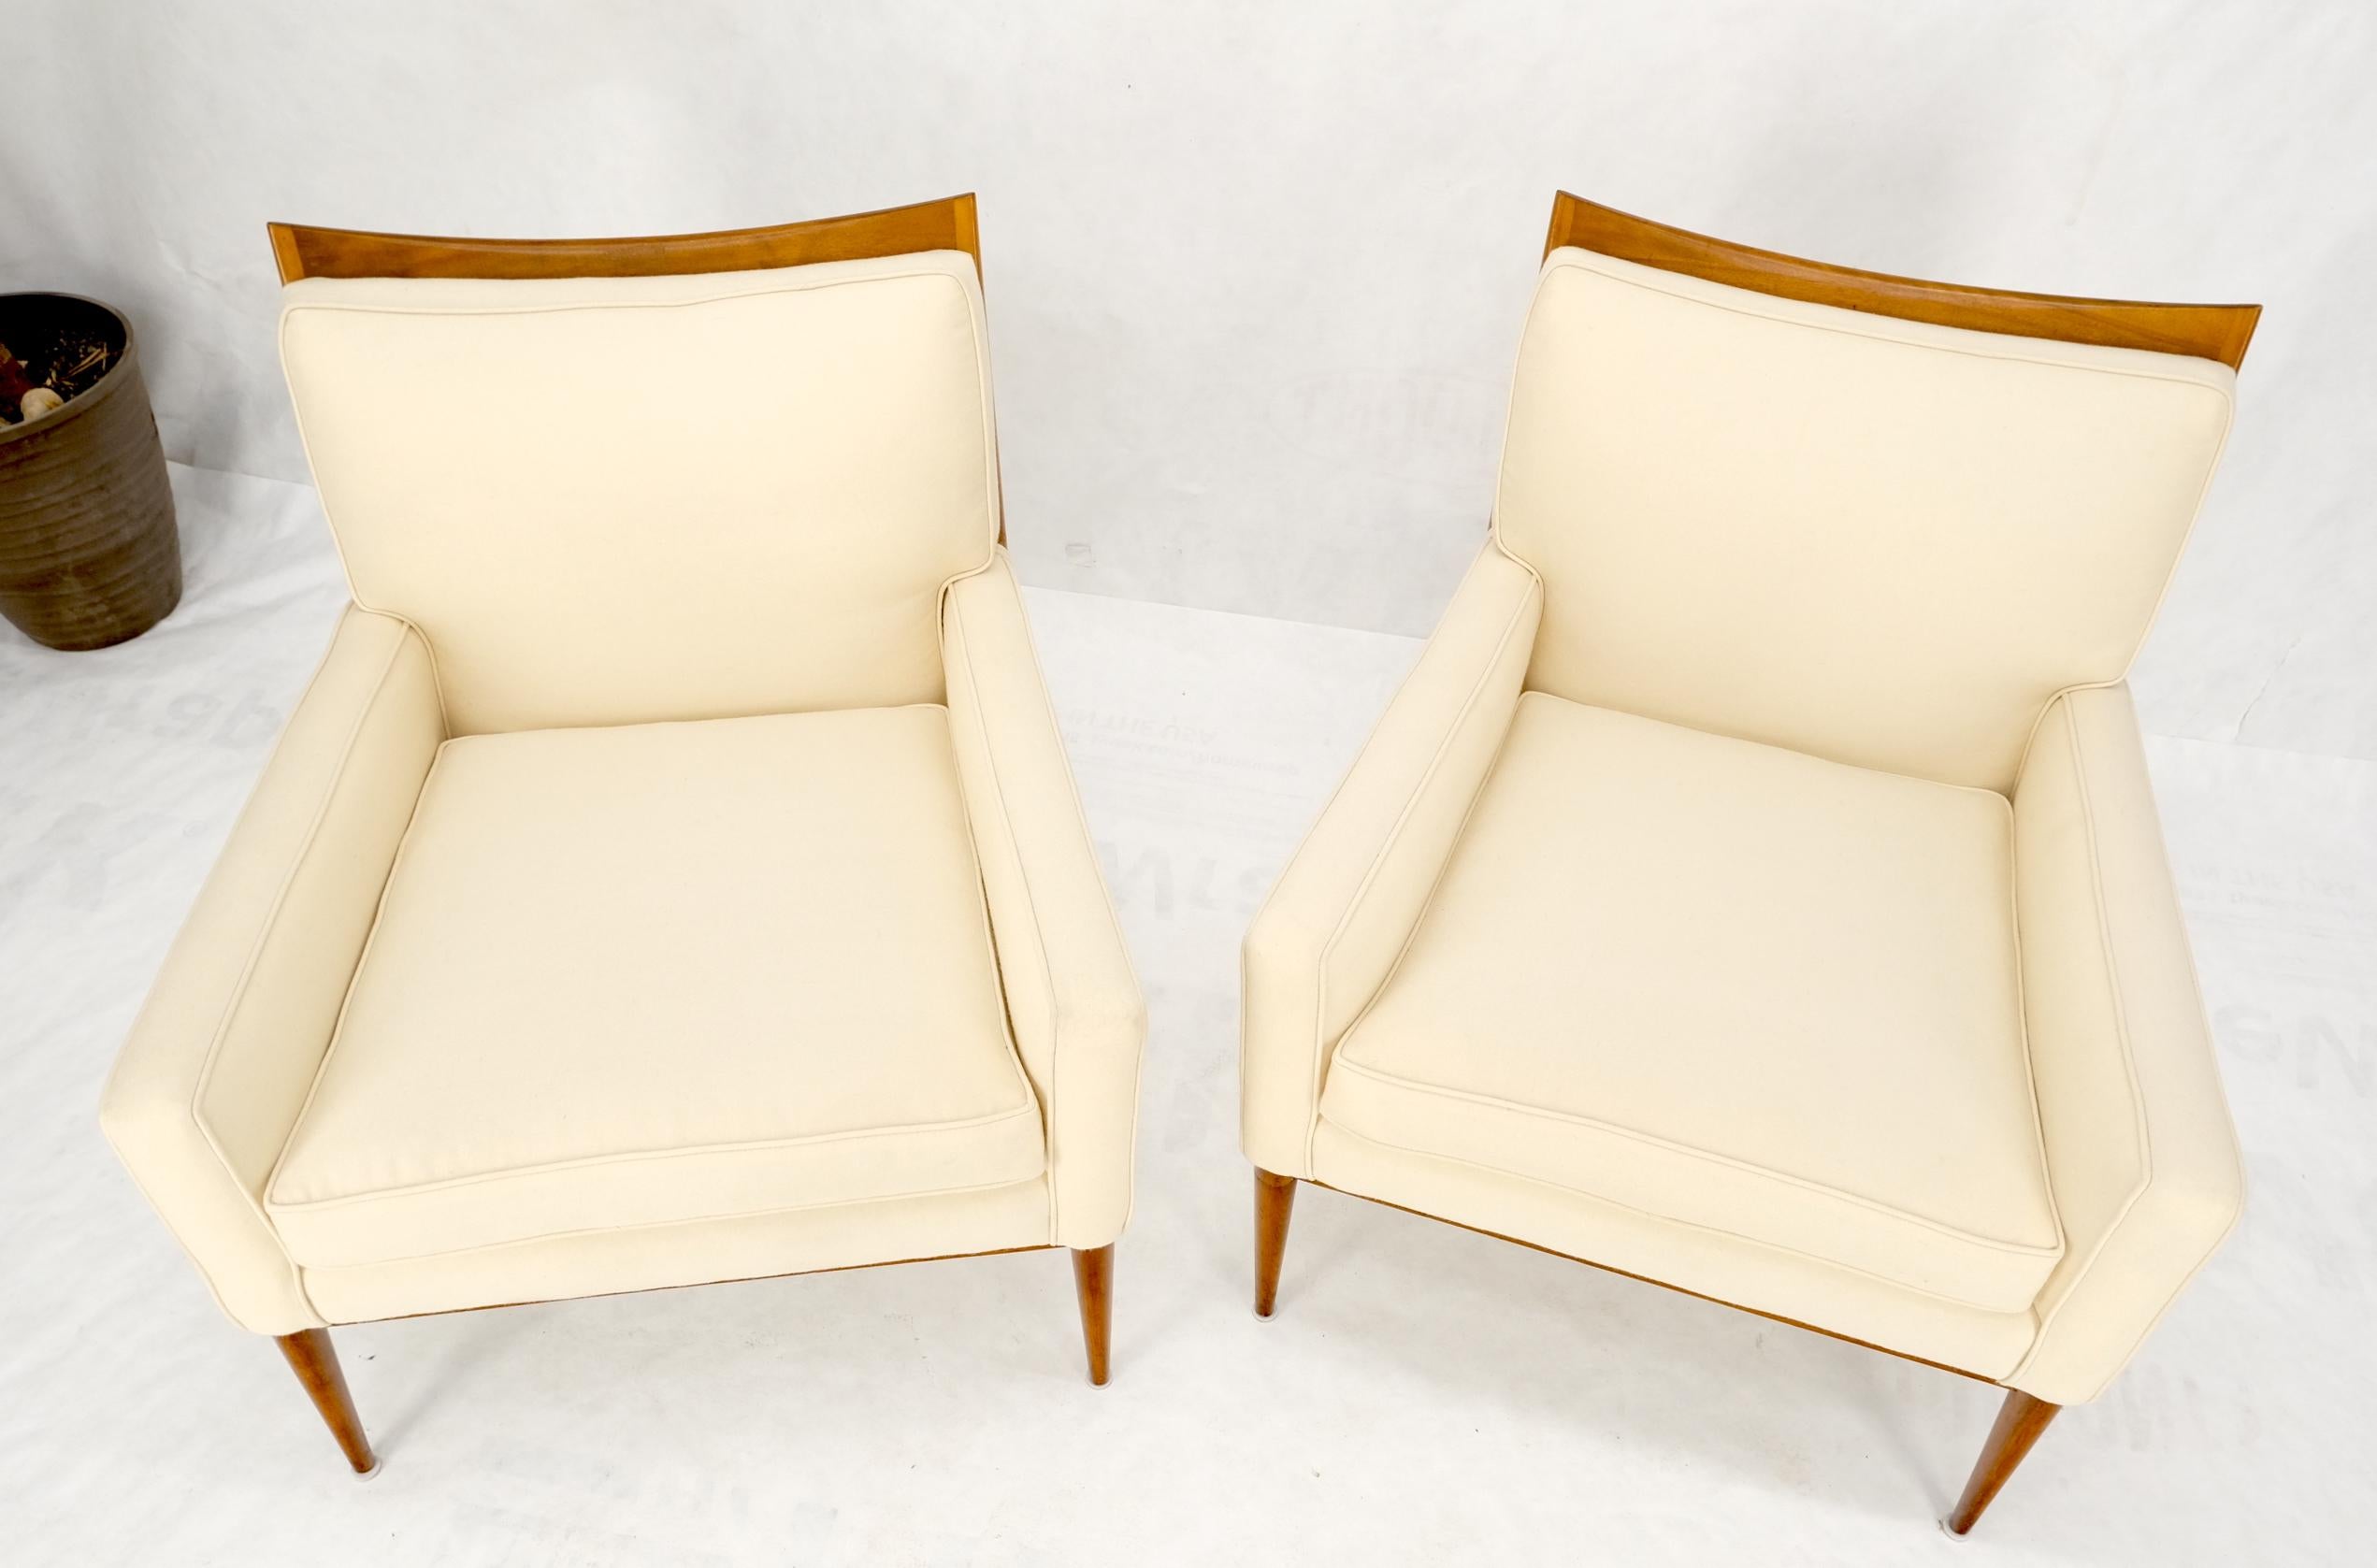 Pair of Mid Century Modern McCobb Chairs Newly Upholstered in Cream Virgin Wool For Sale 9